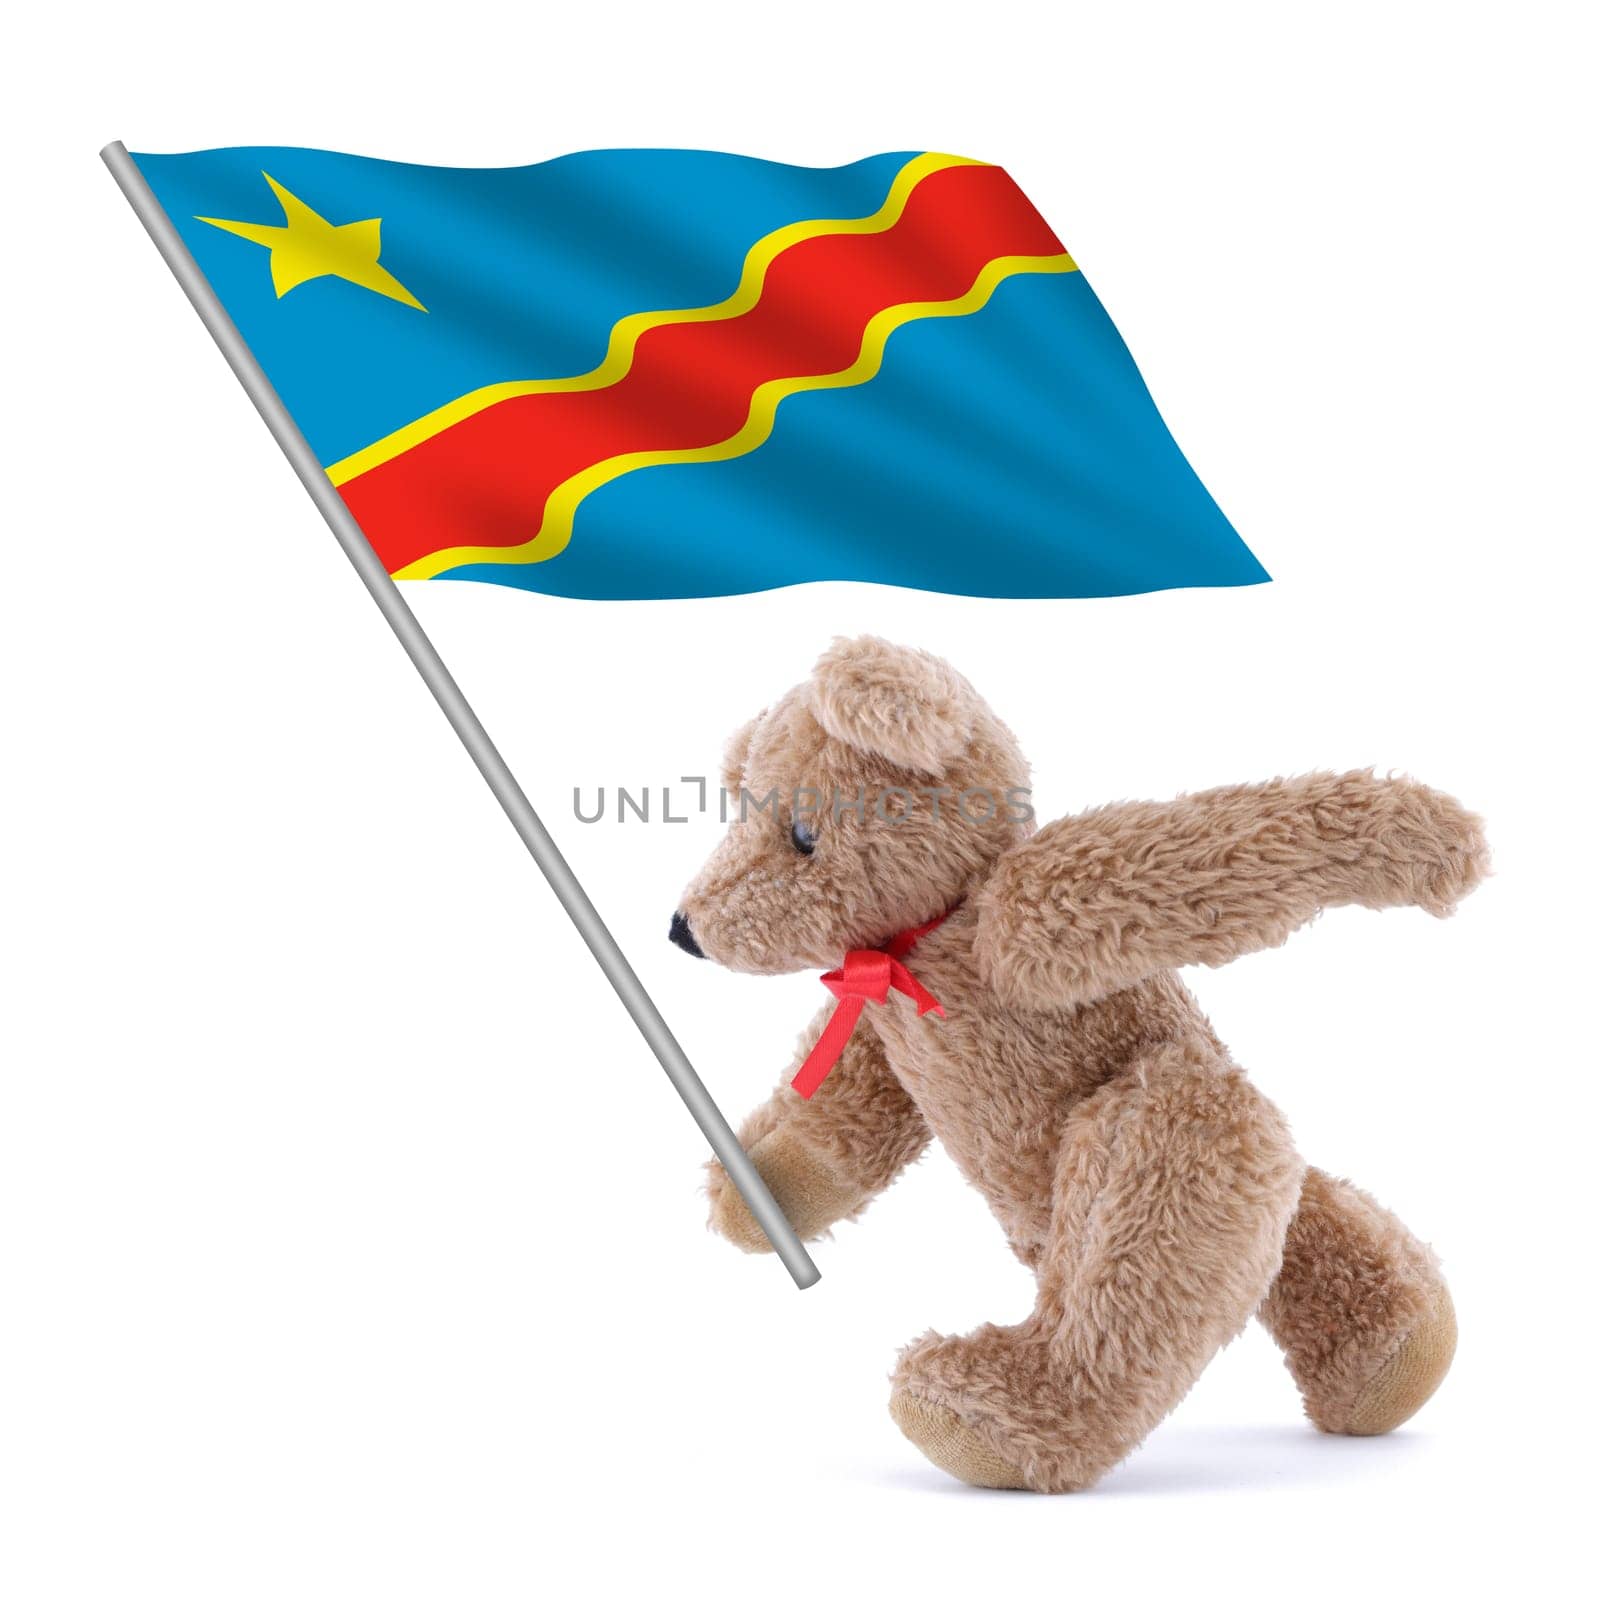 Democratic Republic of Congo flag being carried by a cute teddy bear by VivacityImages